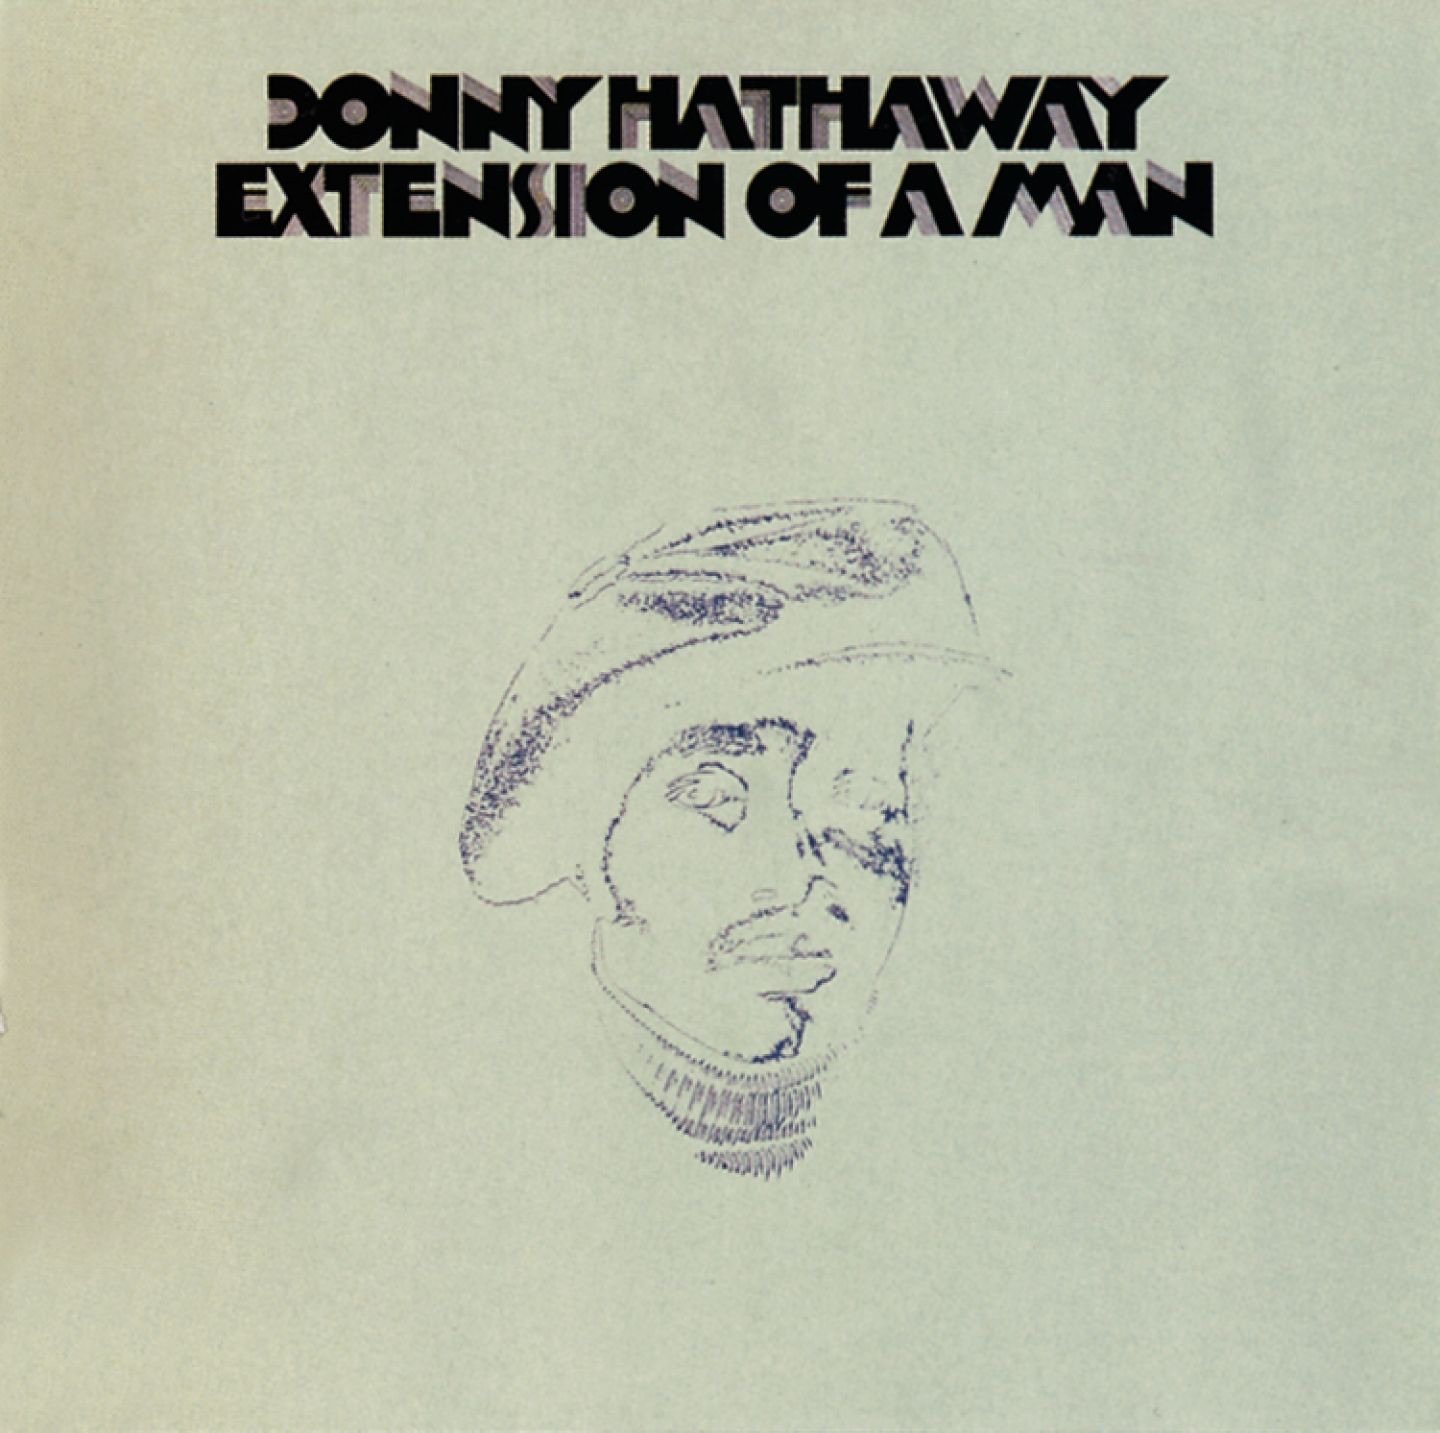 POSmusic background music streaming platform & bar music playlists Donny Hathaway - Valdez In the Country